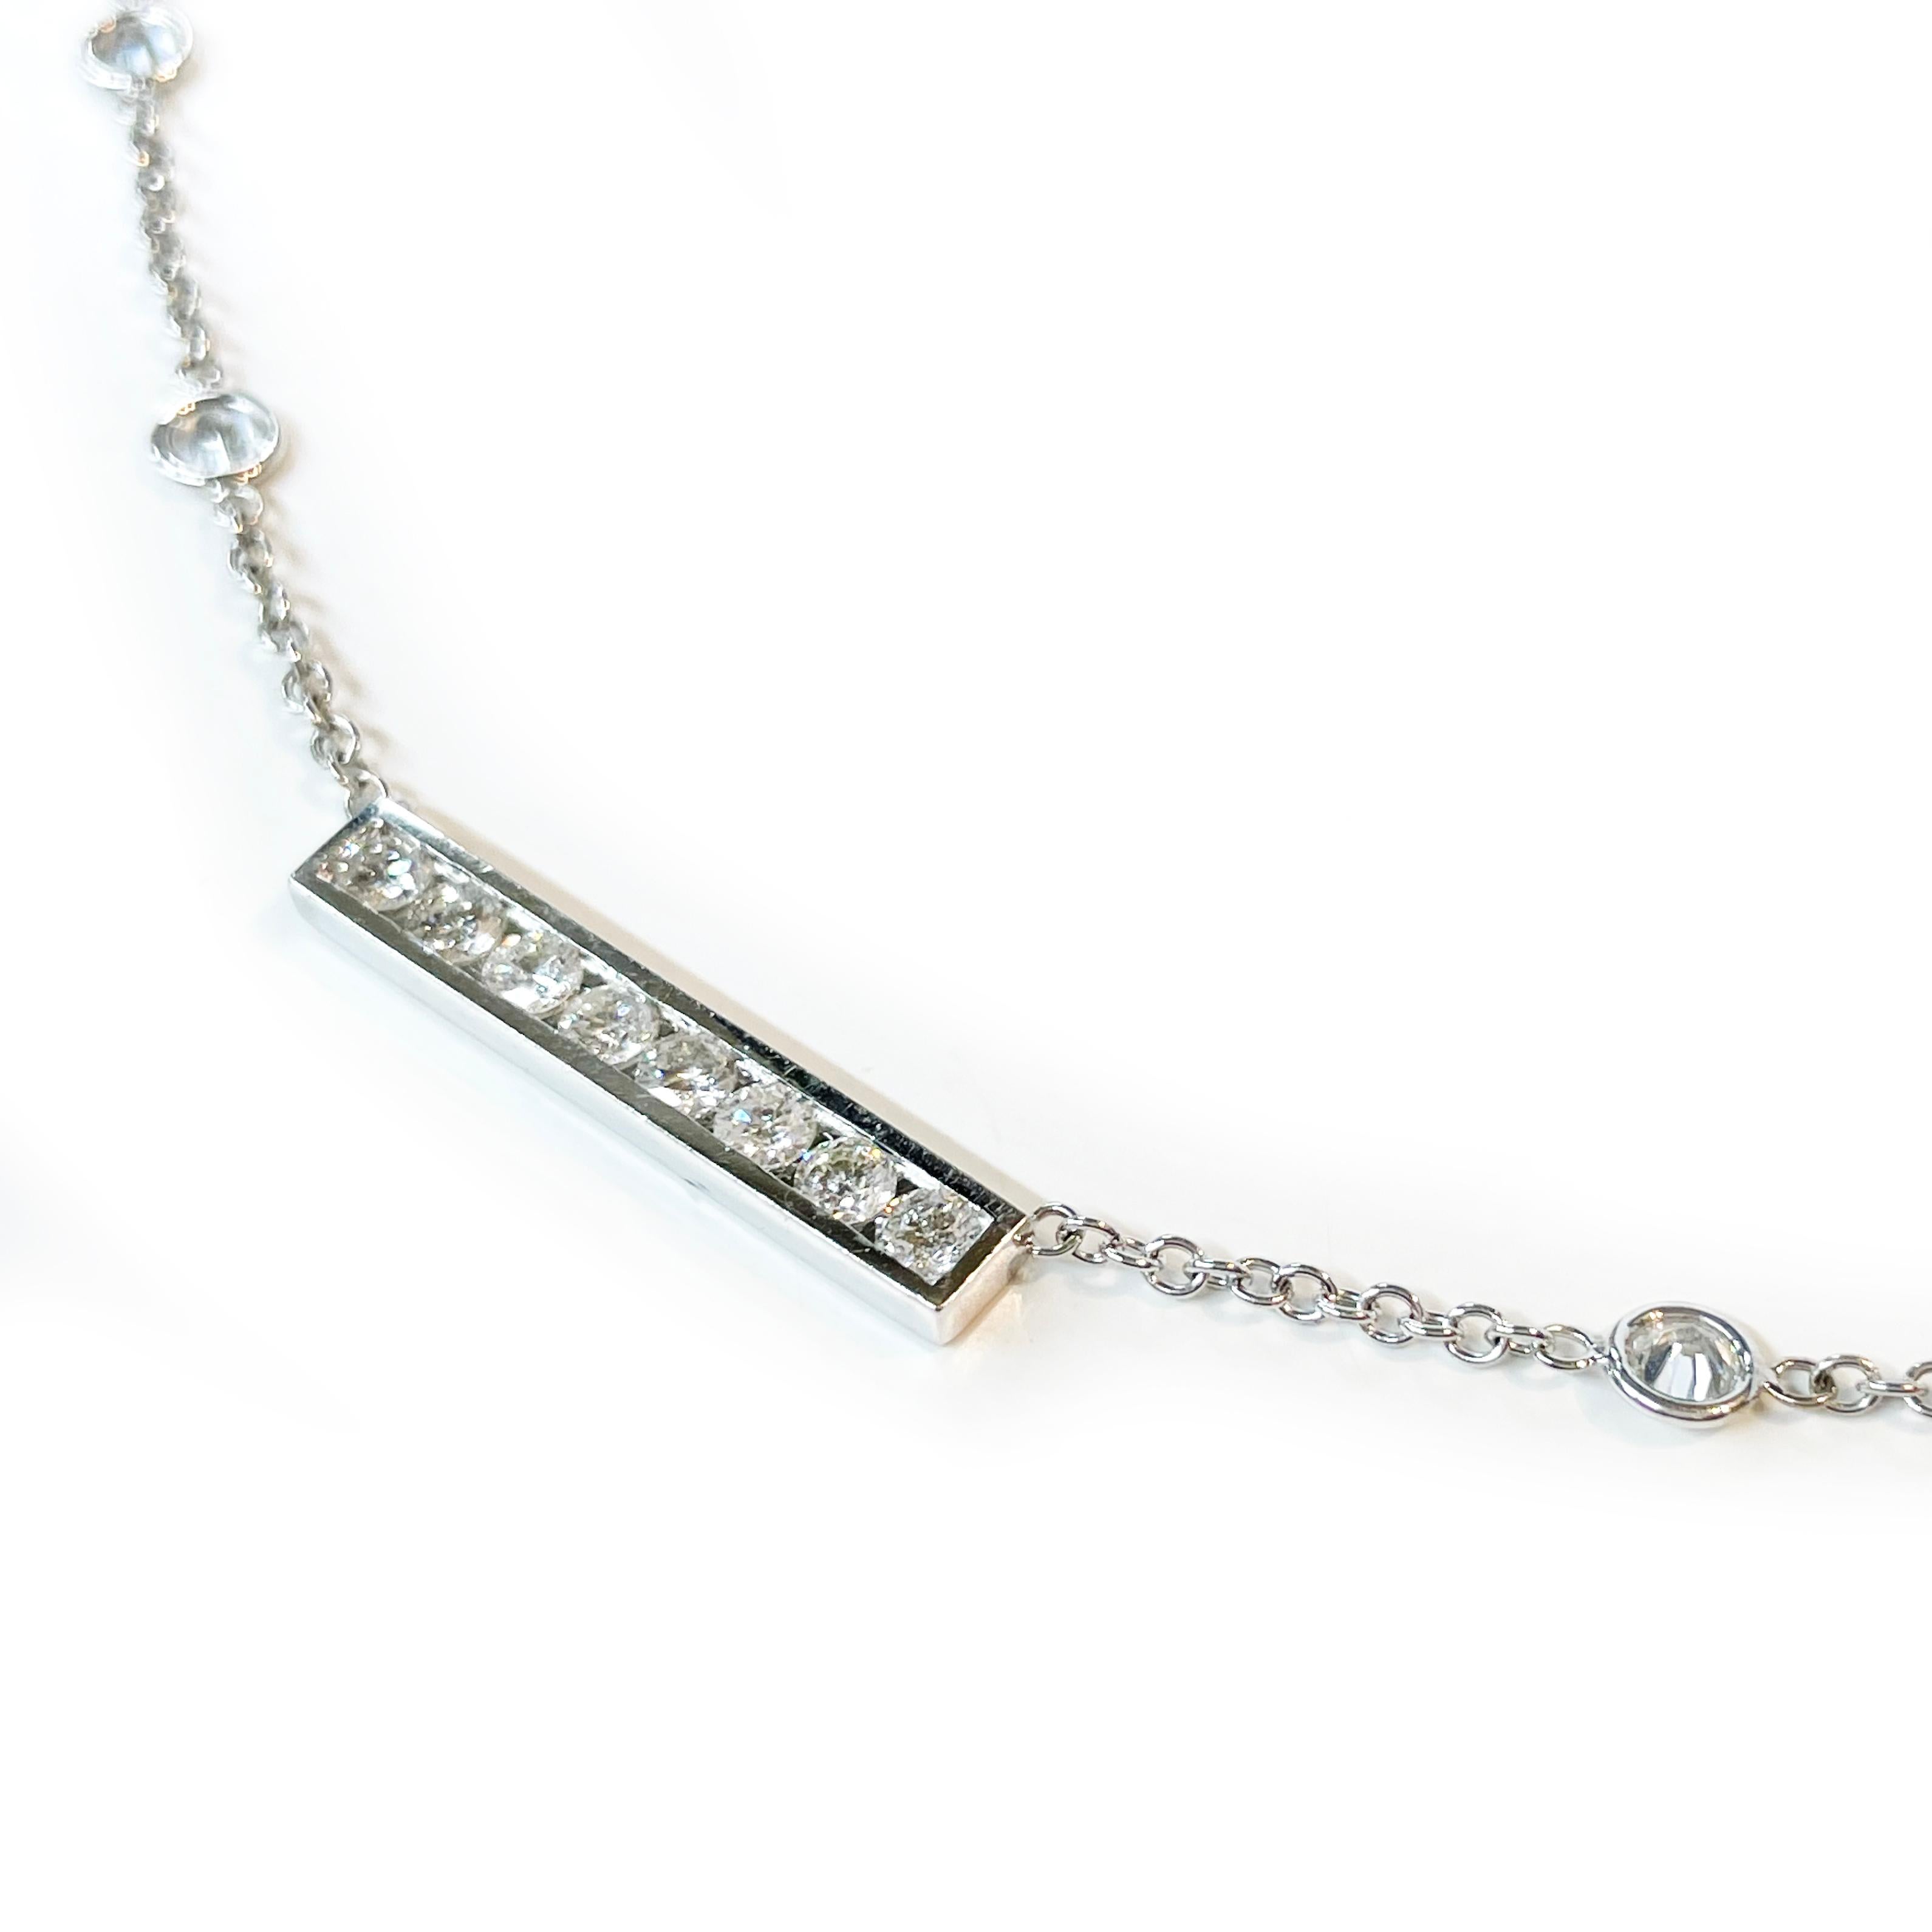 White Gold Bar Diamond Station Necklace. Eight exquisite 3mm diamonds are channel-set in a diamond bar at the bottom of the necklace. Eight 3.4mm diamonds are bezel-set in circle stations approximately an inch apart on the lower half of the